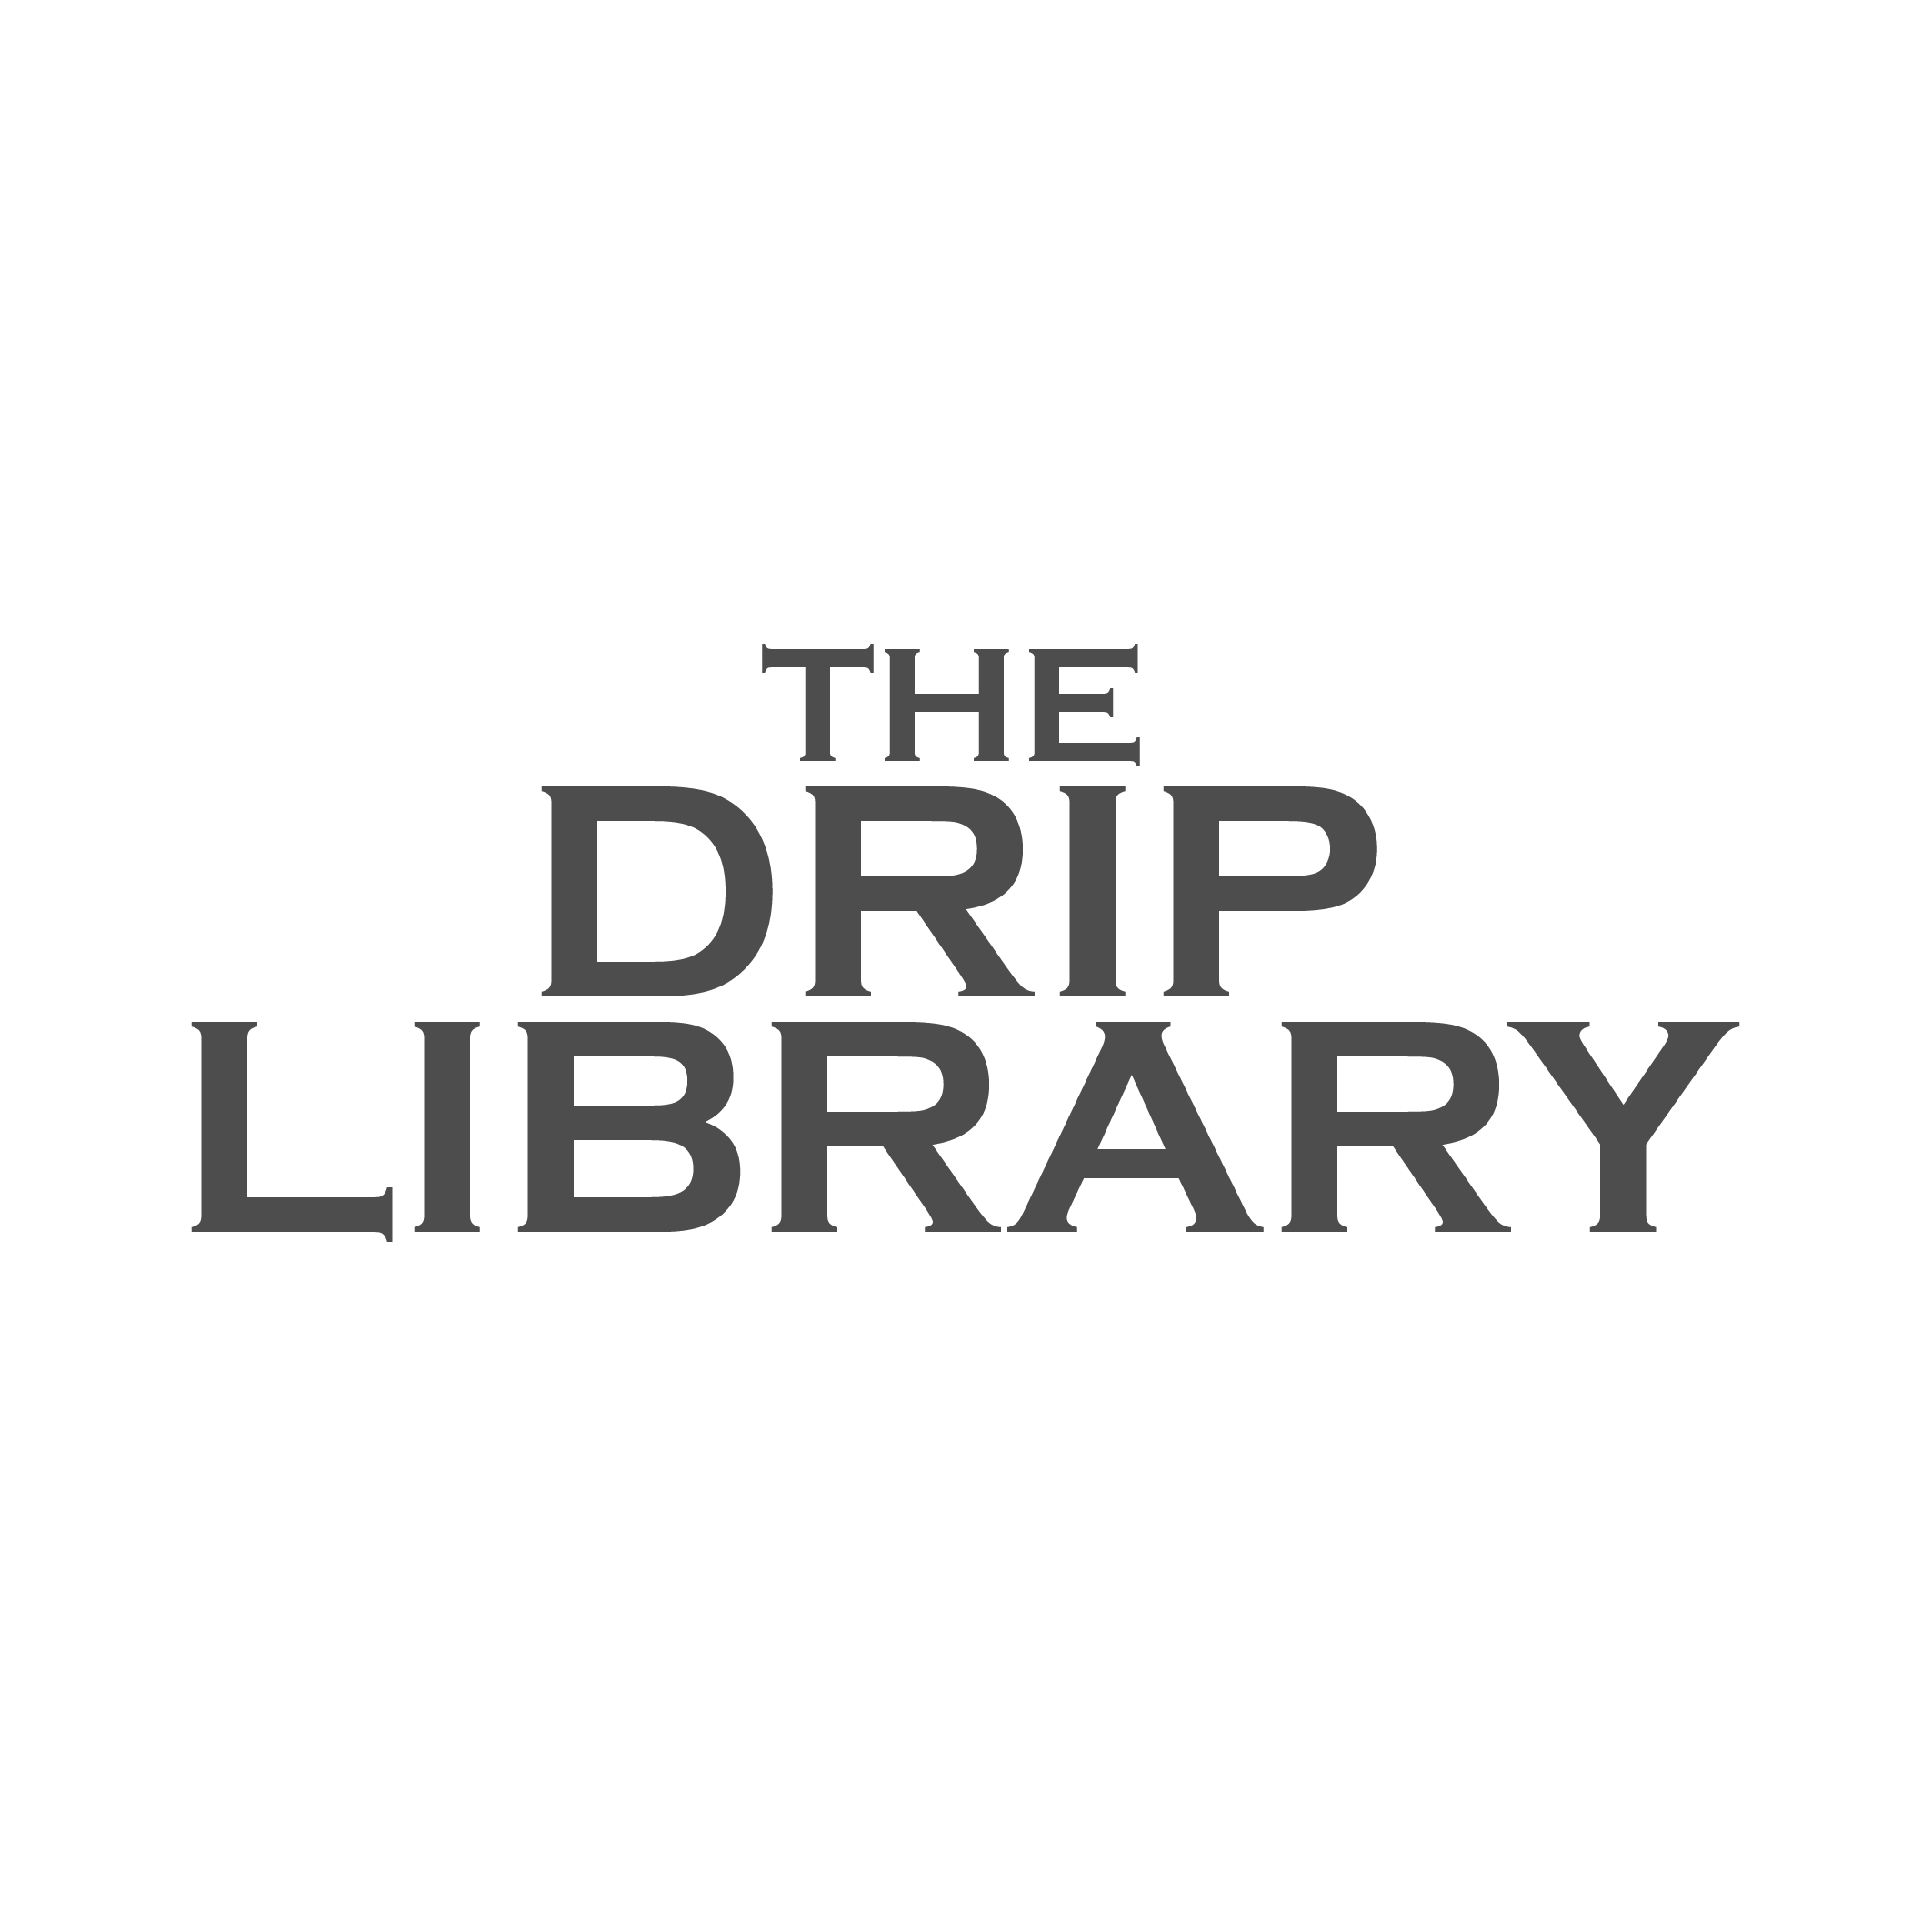 The Drip Library Logo